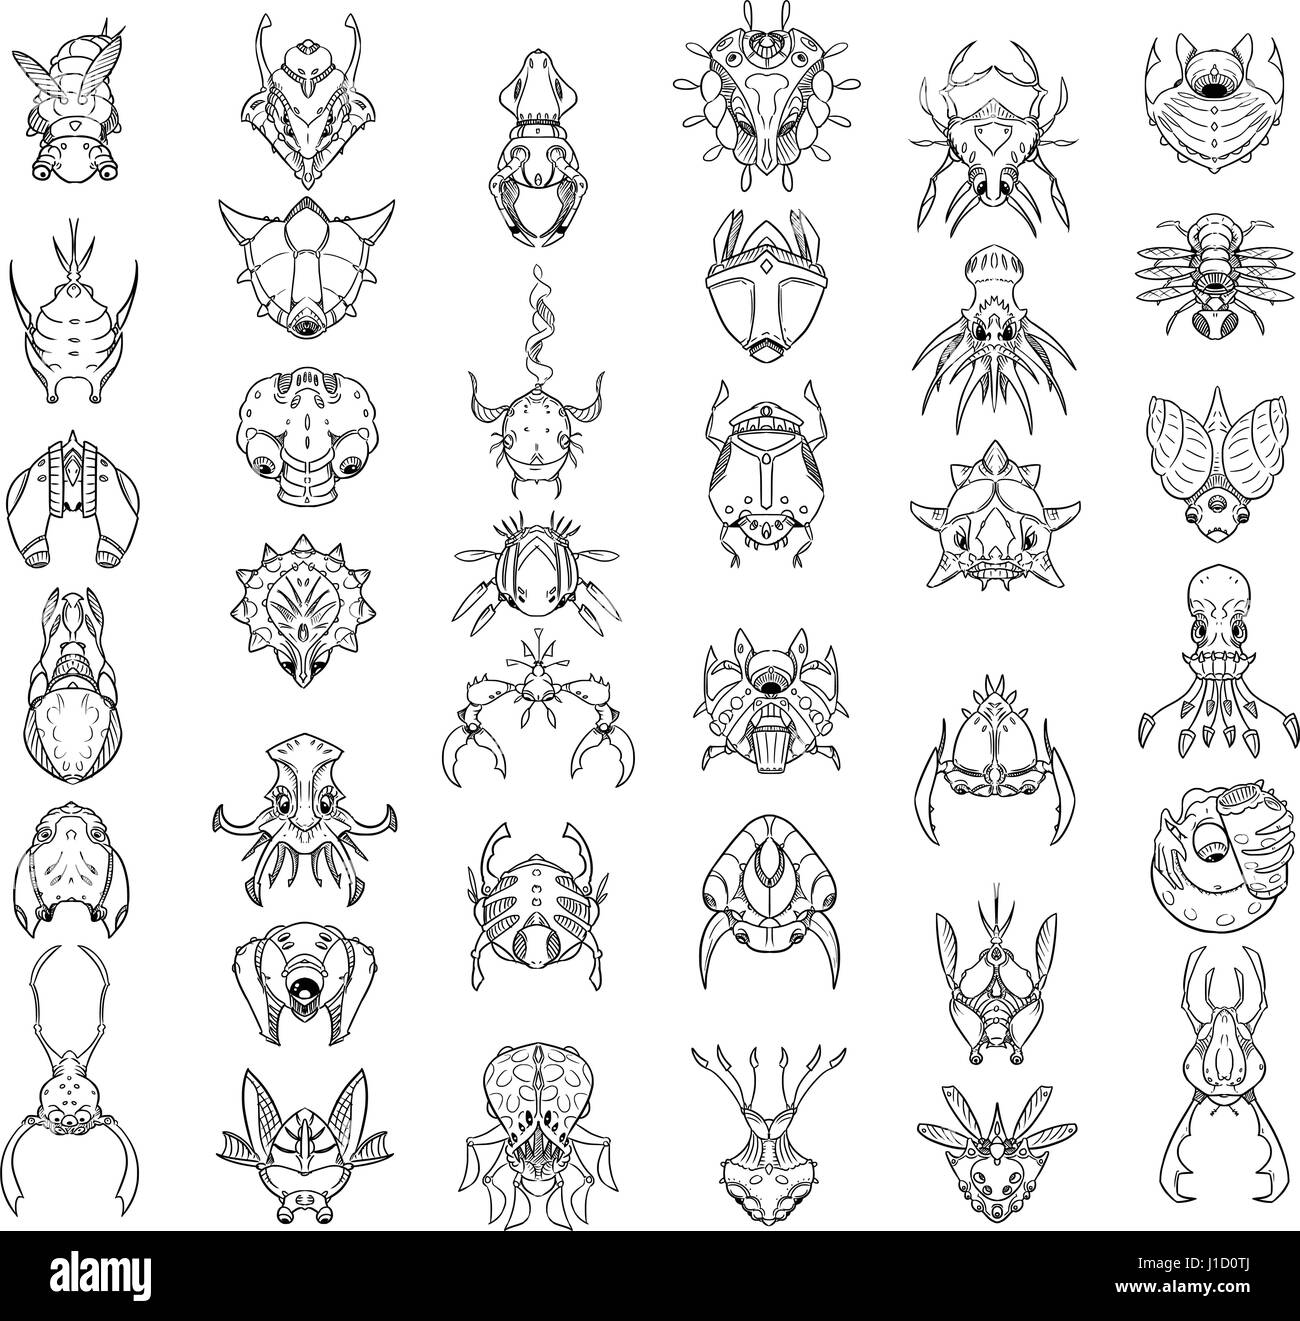 Large Set of 37 hand drawn cartoon monsters and creatures in top down view Stock Vector